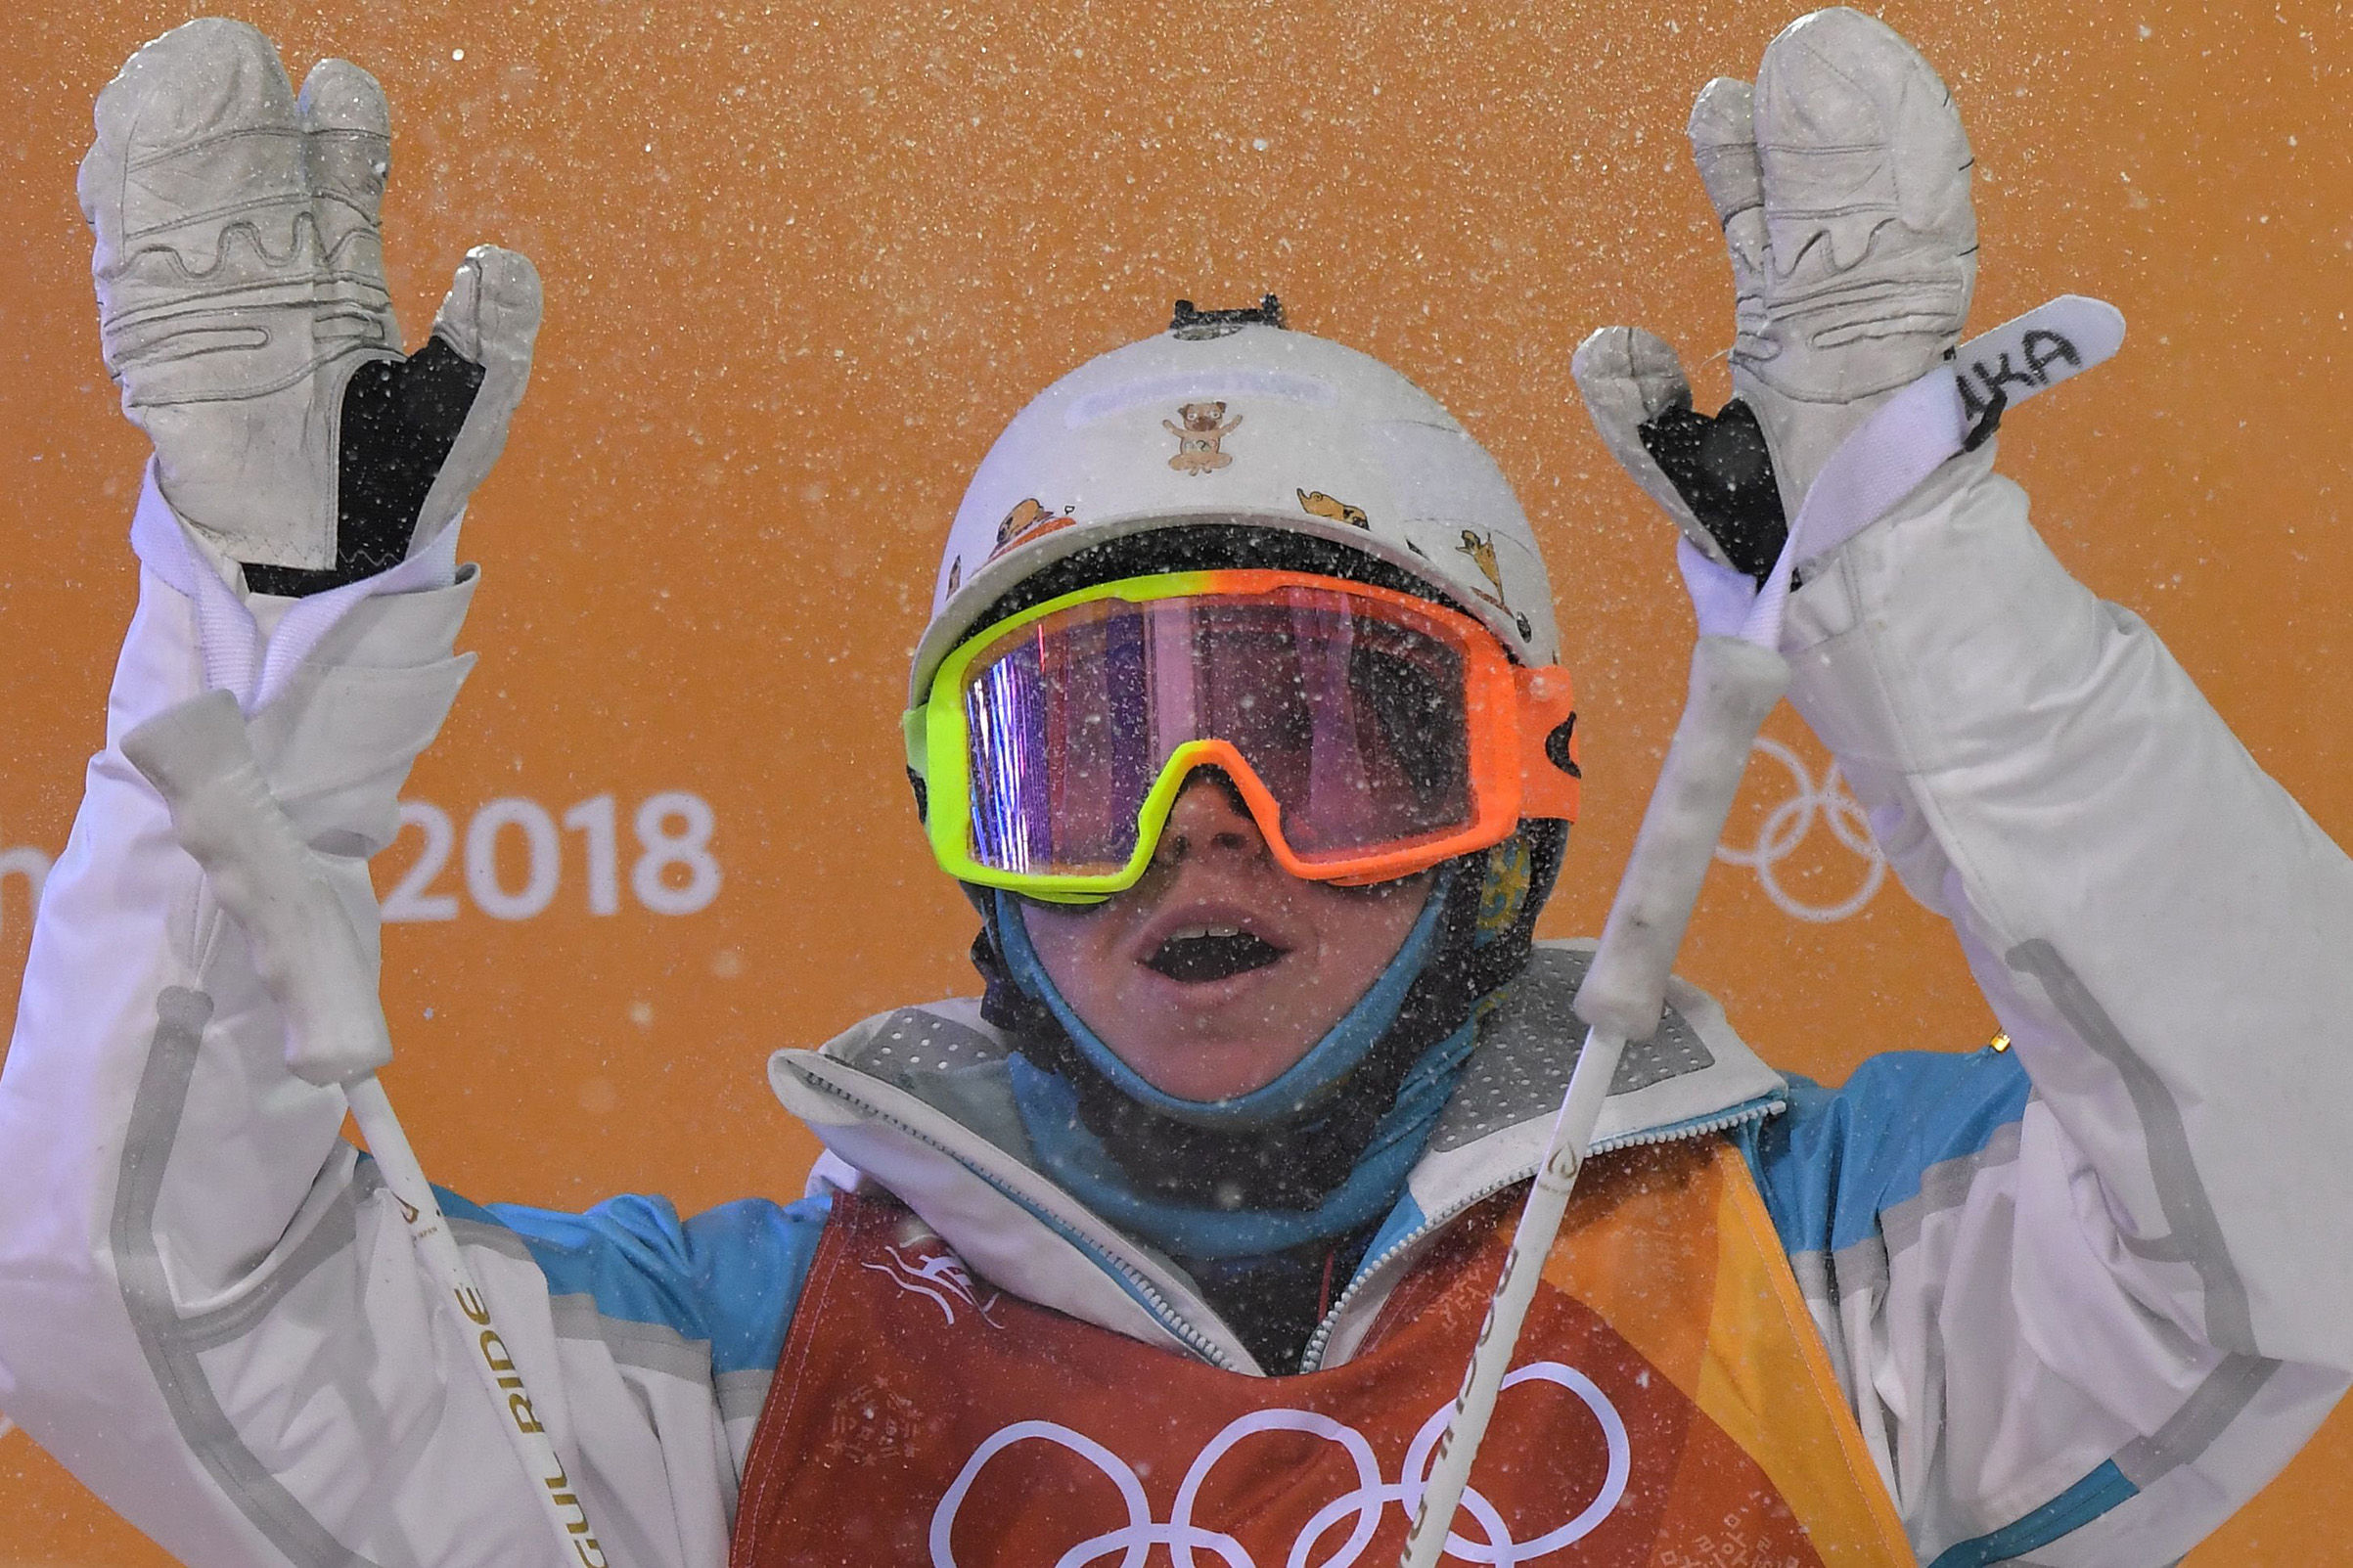 Kazakhstan's Yulia Galysheva reacts after the women's moguls final event during the Pyeongchang 2018 Winter Olympic Games on Feb. 11, 2018. (Loic Venance—AFP/Getty Images:)